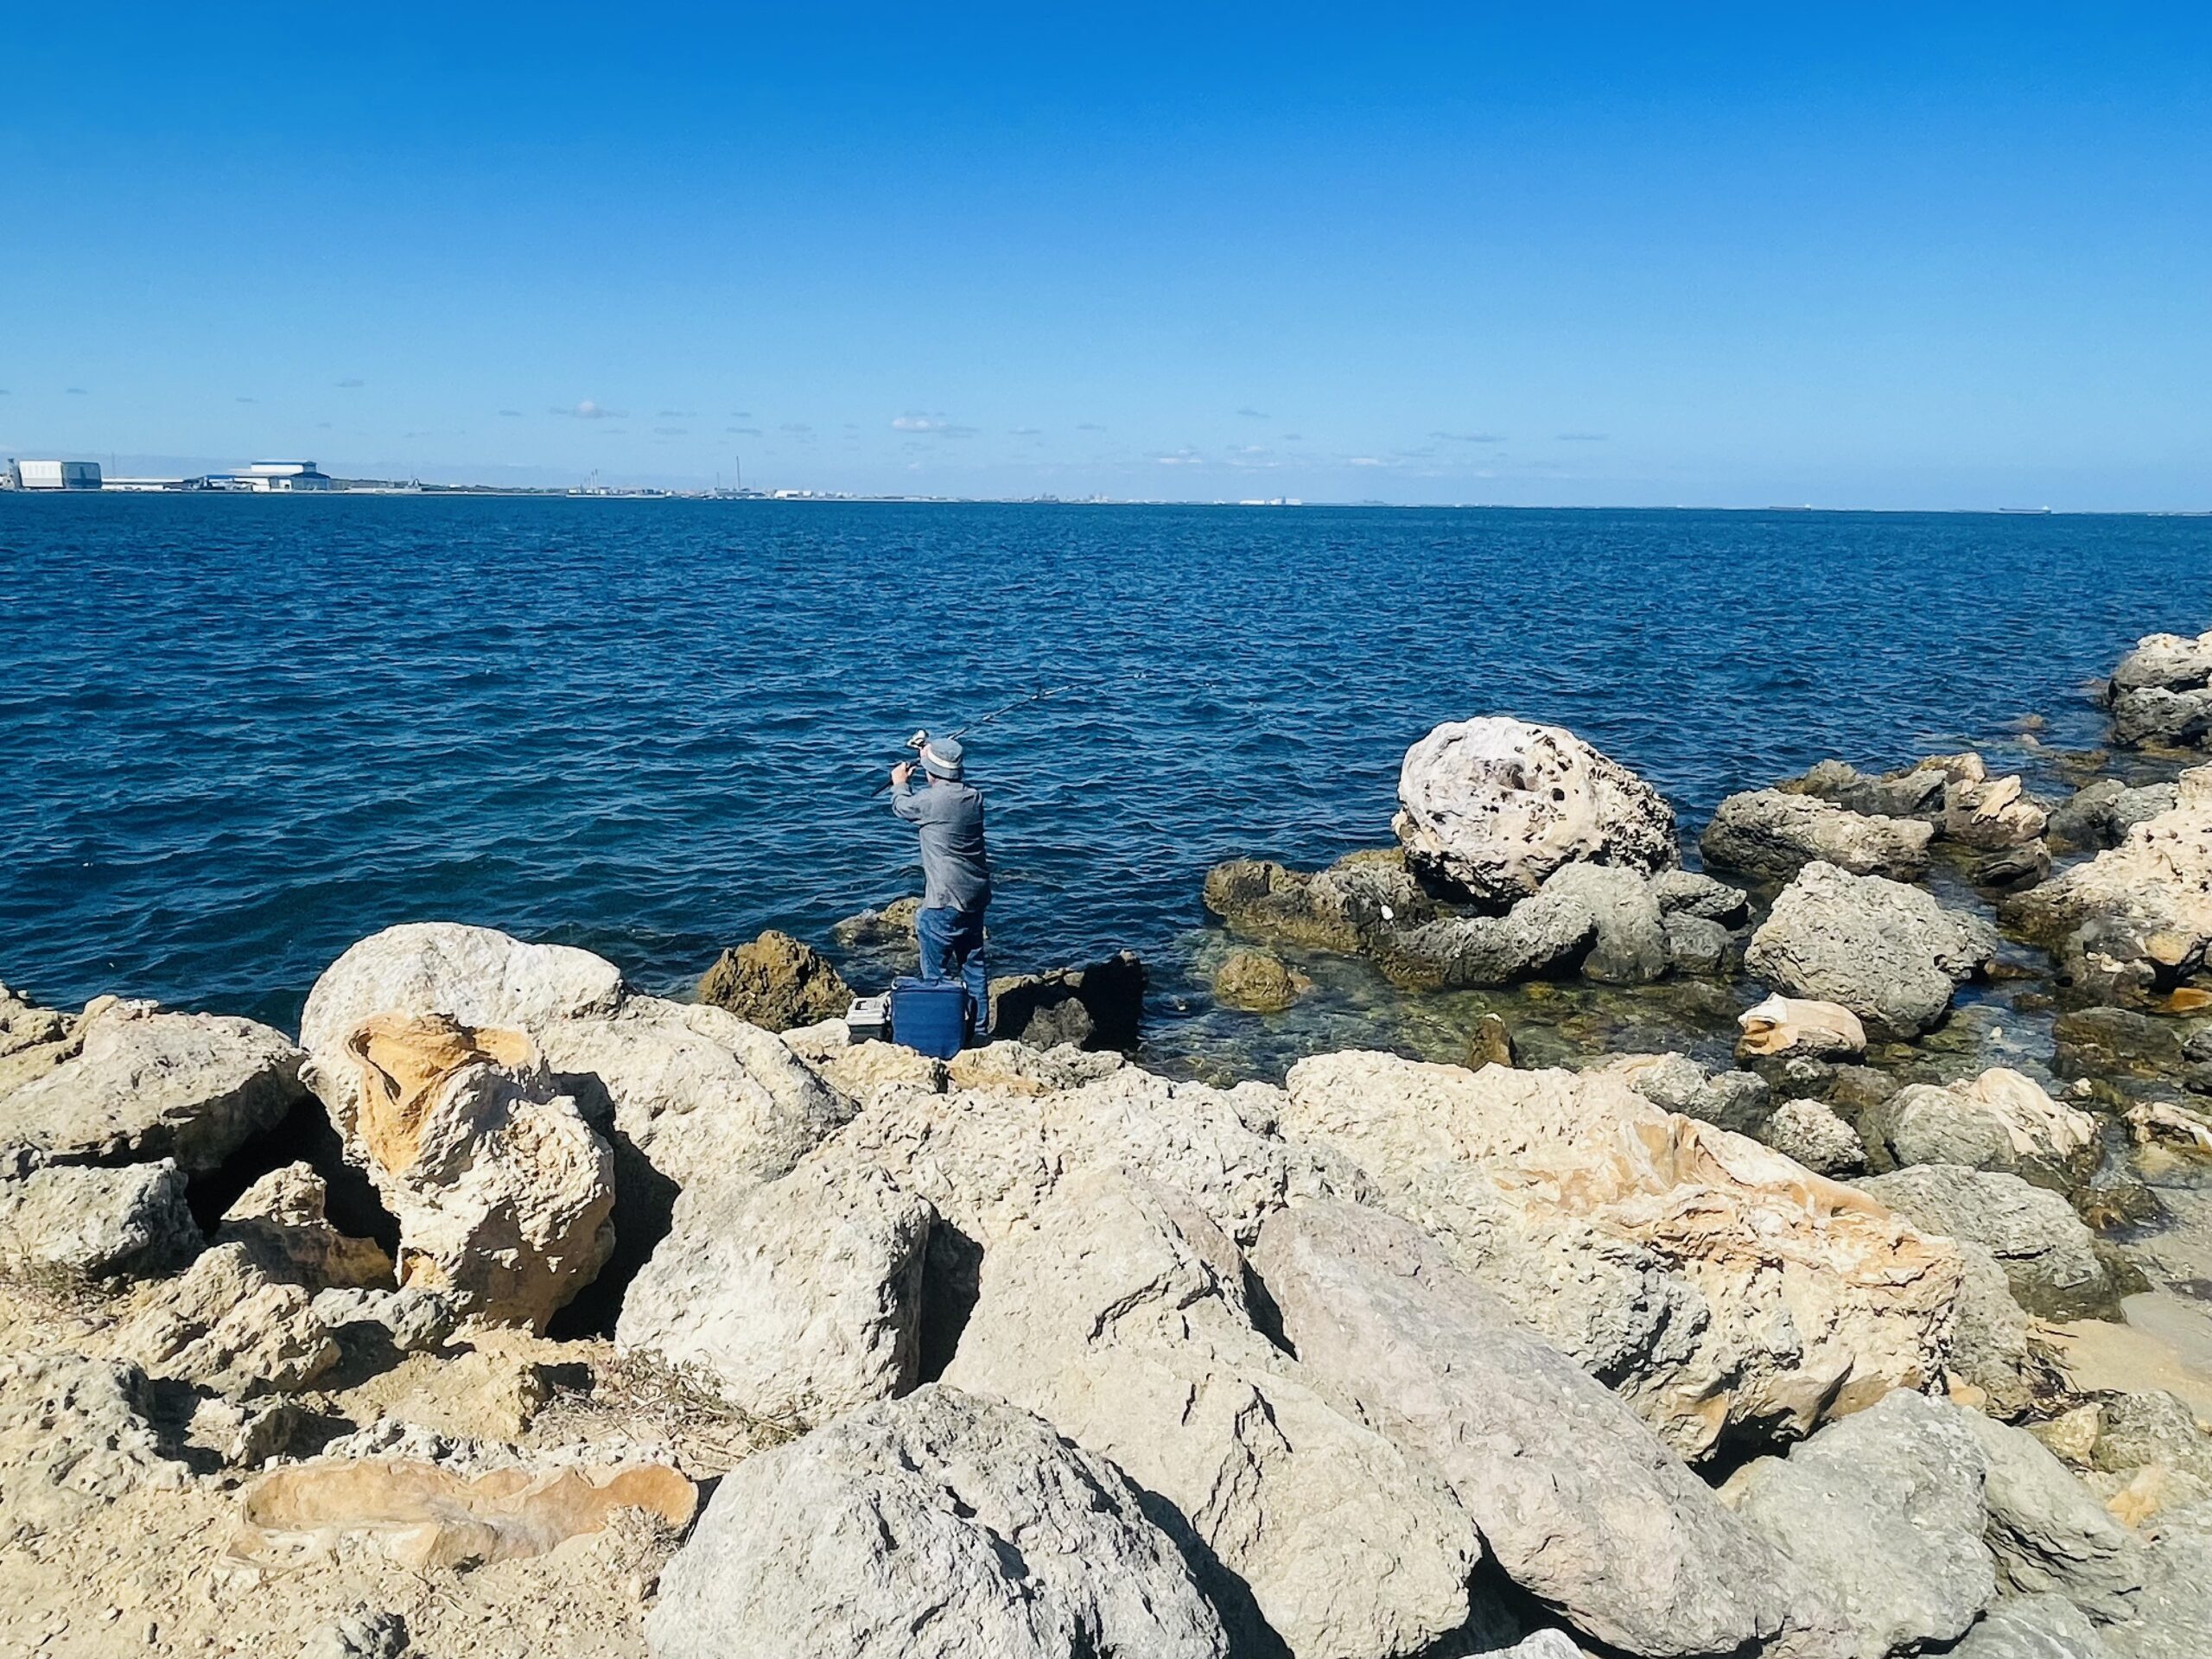 This photograph was taken of a man rock fishing at Woodman Point Headland. The man is standing on the cream-coloured rocks as he lifts his fishing rod over his head to cast into the dark blue ocean